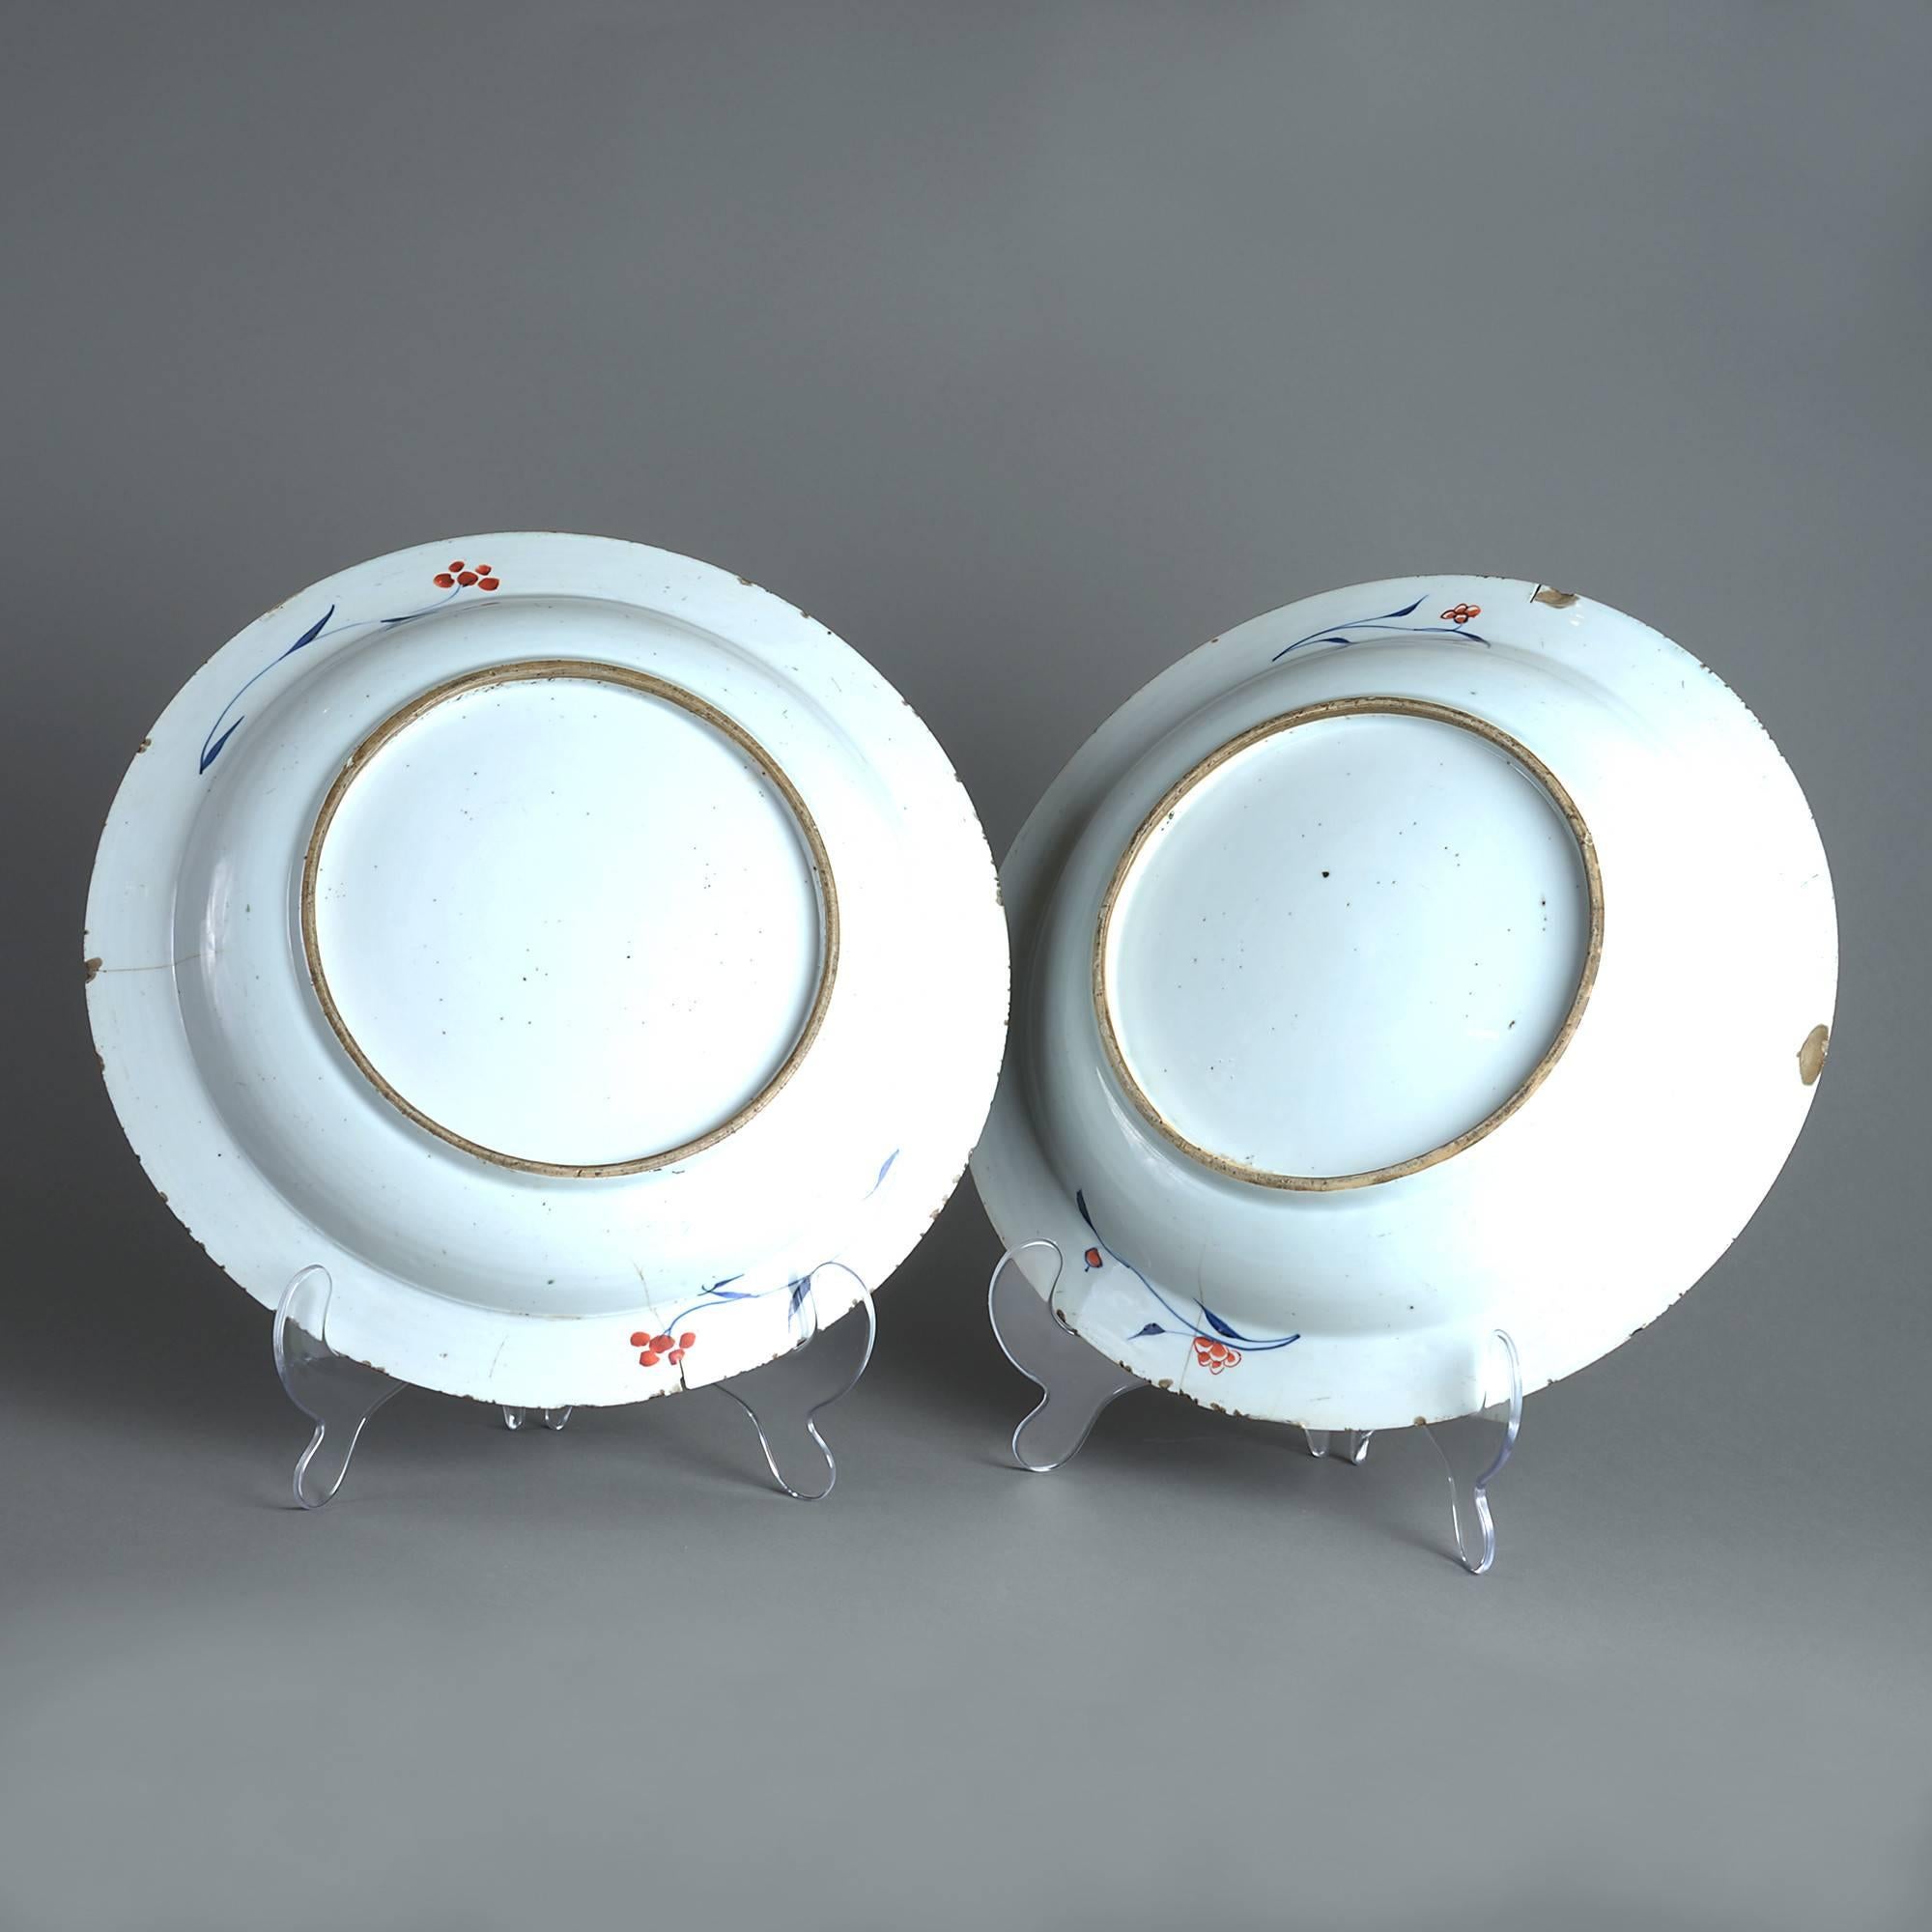 A pair of early 18th century porcelain chargers, decorated with stylized flowers and foliage in polychrome glazes upon a white ground in imitation of Japanese Imari. 

Condition: Commensurate with age (minor hairlines and fritting to underside).